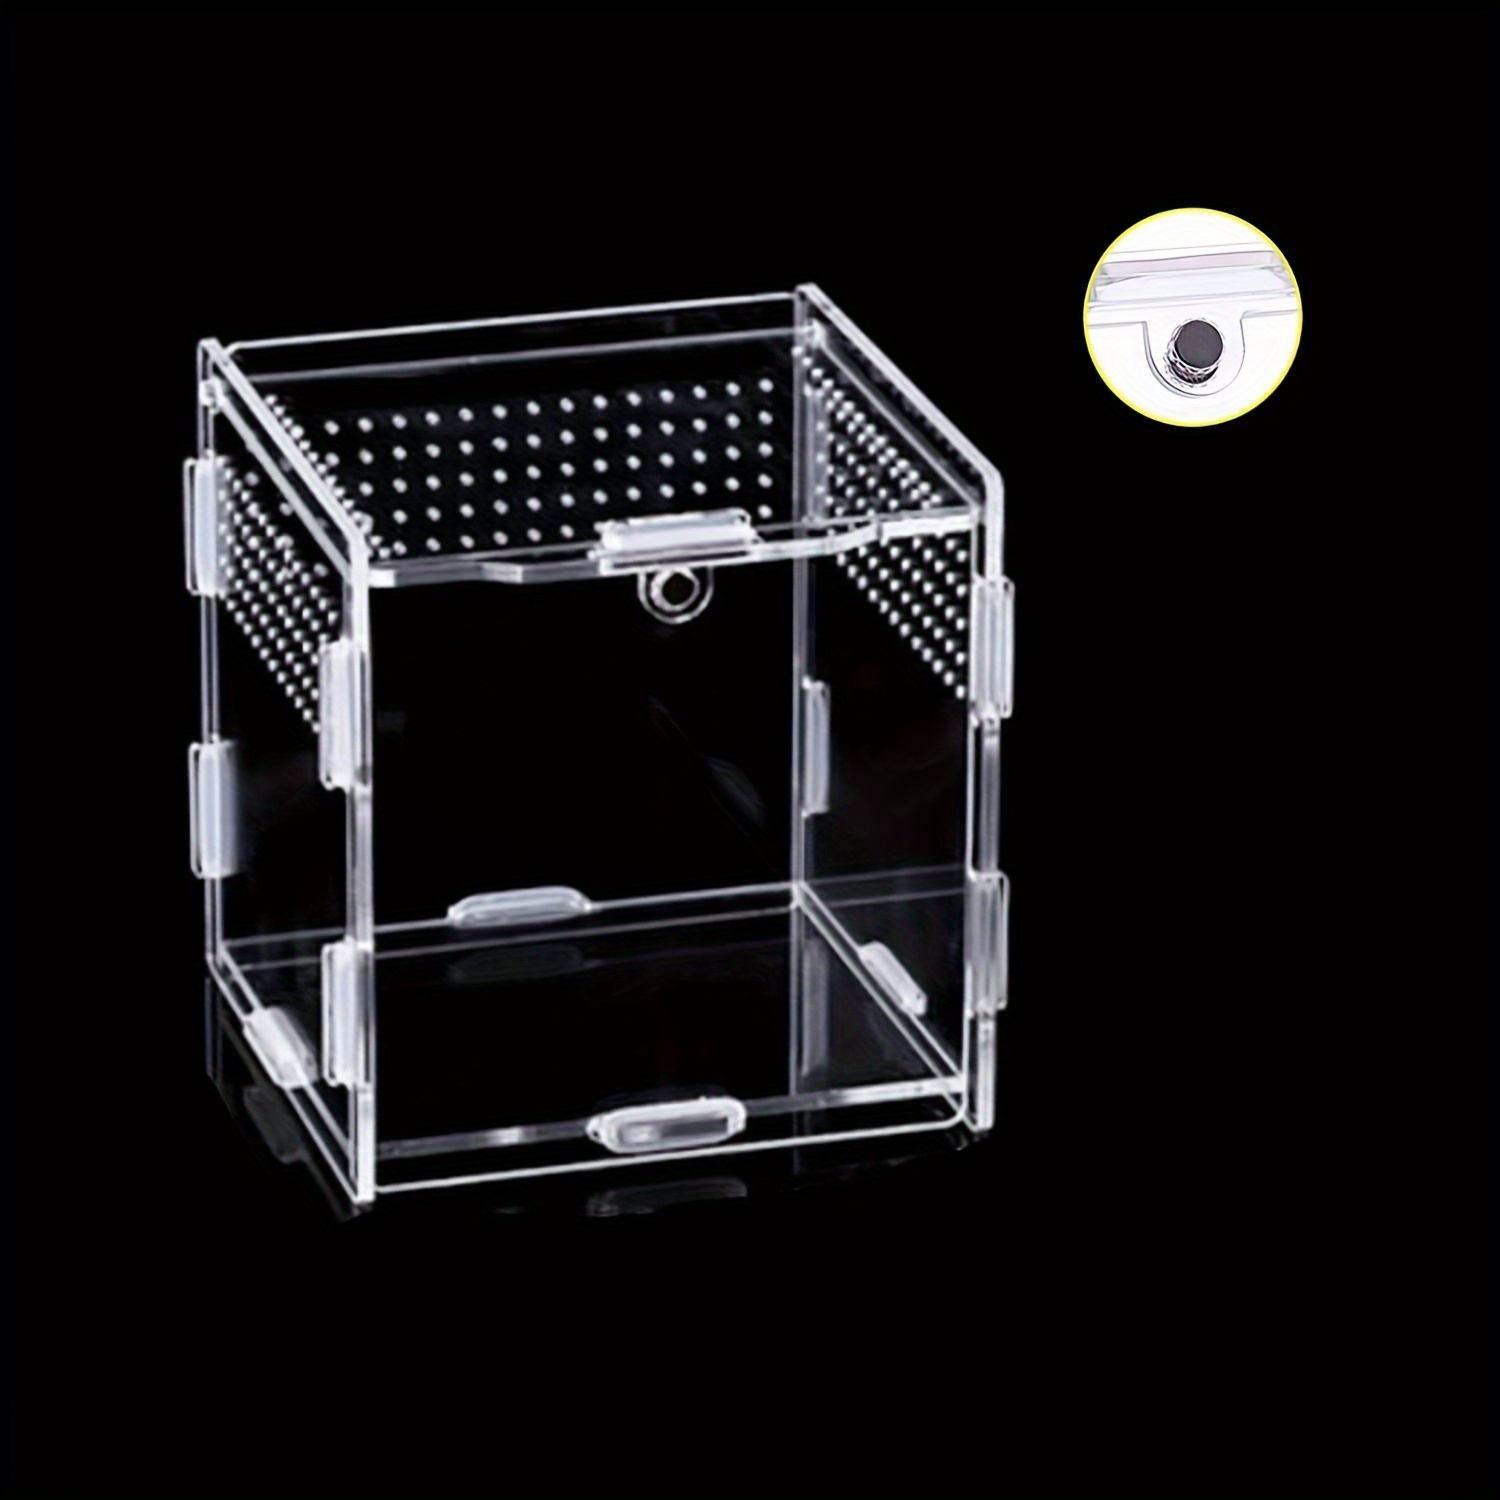 

Square Magnetic Acrylic Terrarium For Hermit Crabs, Reptiles & Insects - Clear Pvc Habitat With Ventilation - Enclosure Ideal For , Scorpions, Lizards, Snakes, Geckos, Jumping Spiders & Isopods